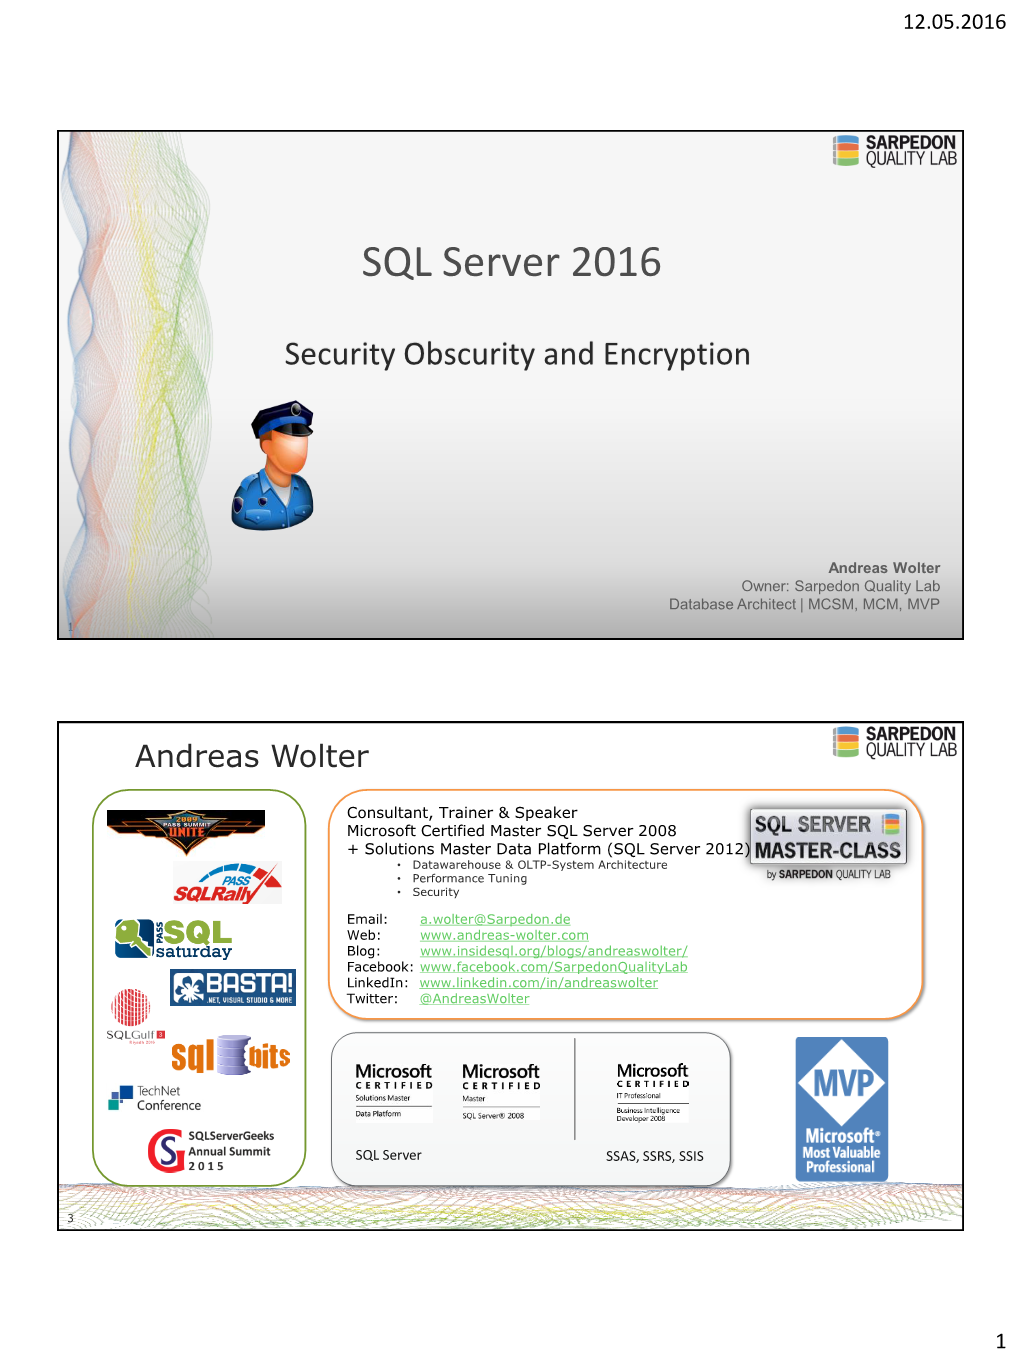 What's New in SQL Security for 2016? Andreas Wolter and Joachim Hammer